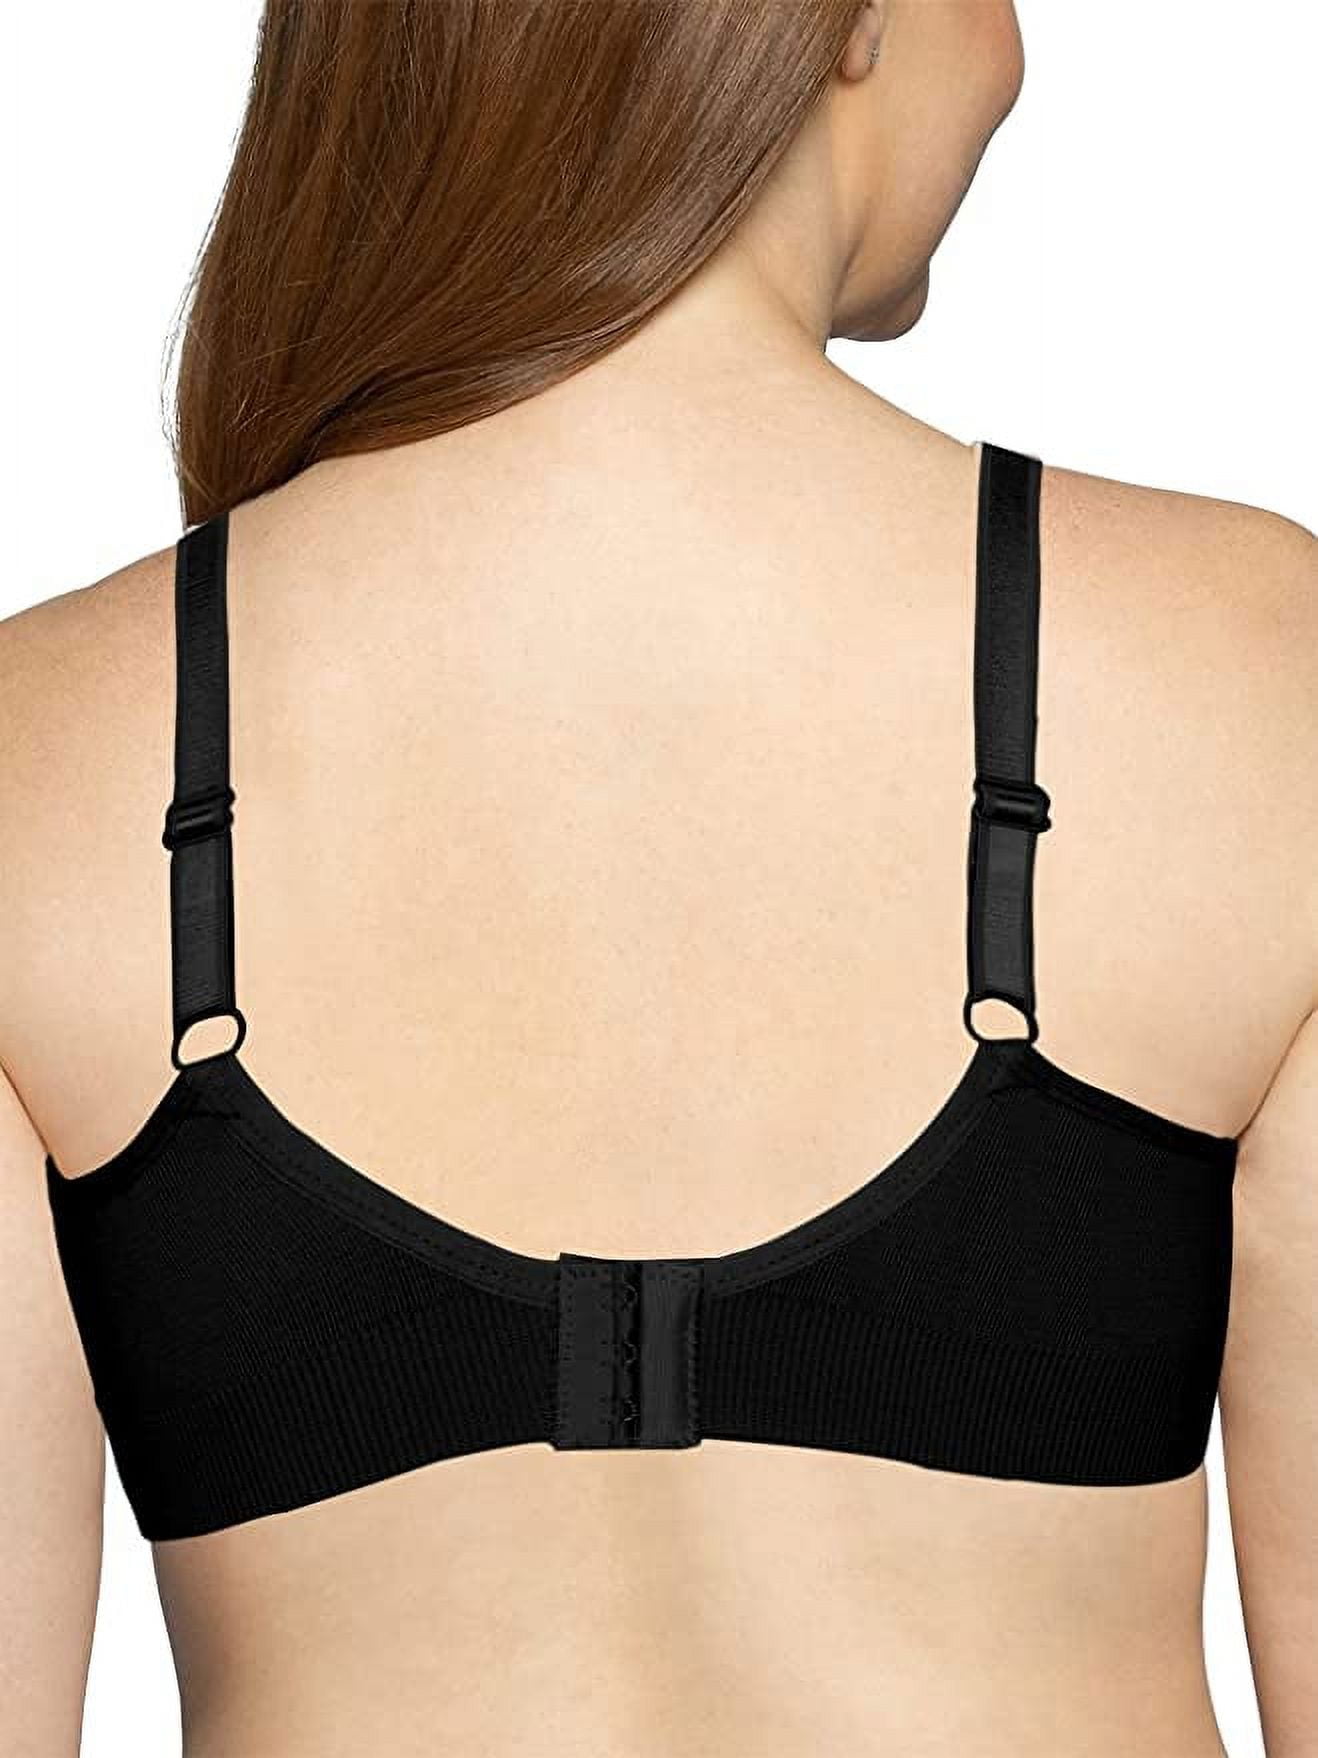 Buy ANKF Bra Without Strip,Free Size(28 to 36) Pack of 2